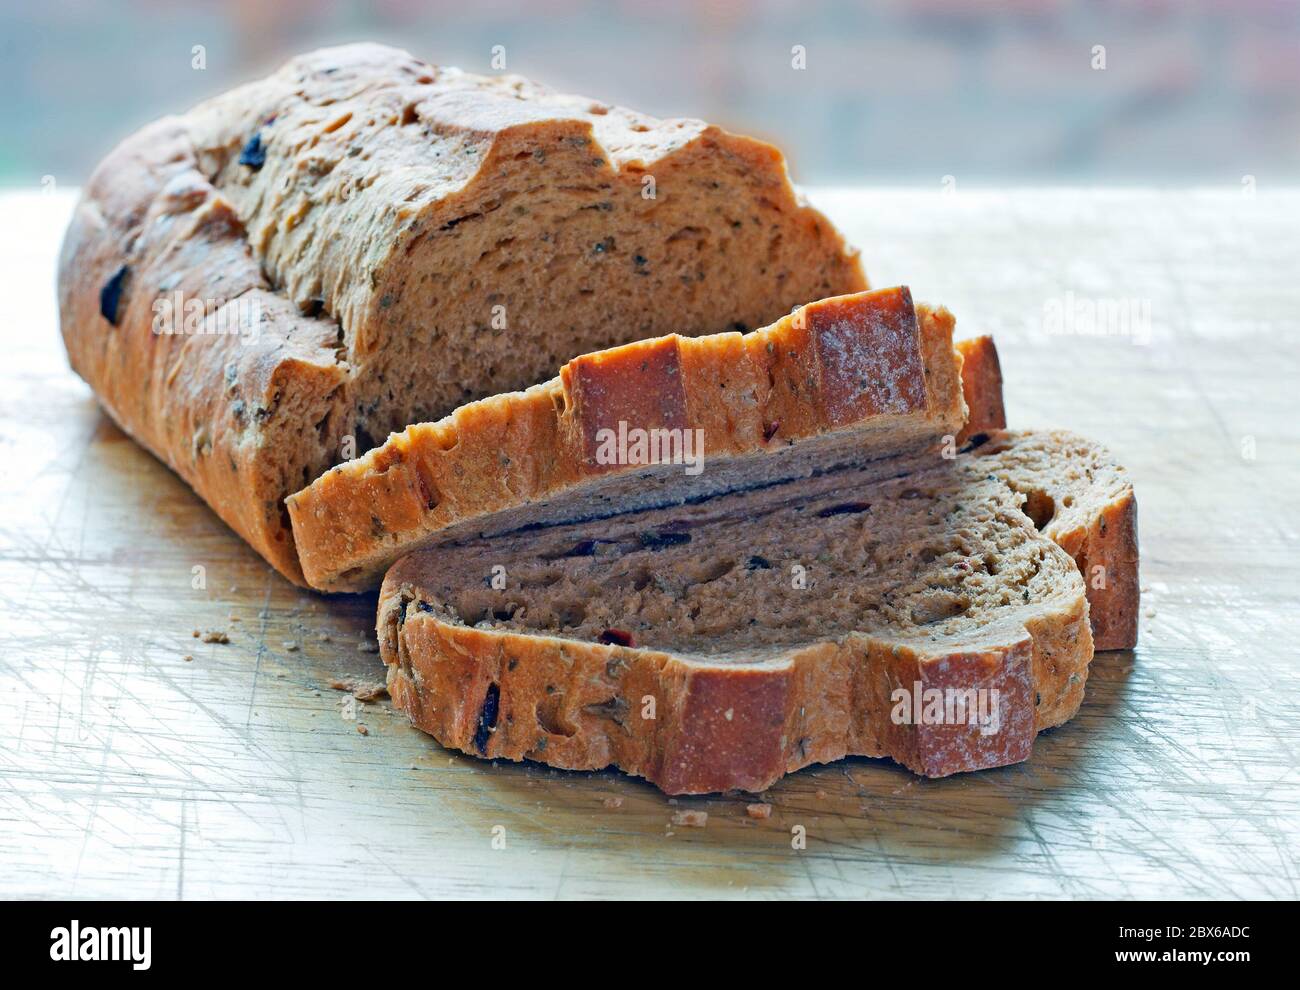 Mediterranean sun dried tomato and olive bread with a shallow depth of field on a cutting board with two sliced pieces and crumbs Stock Photo